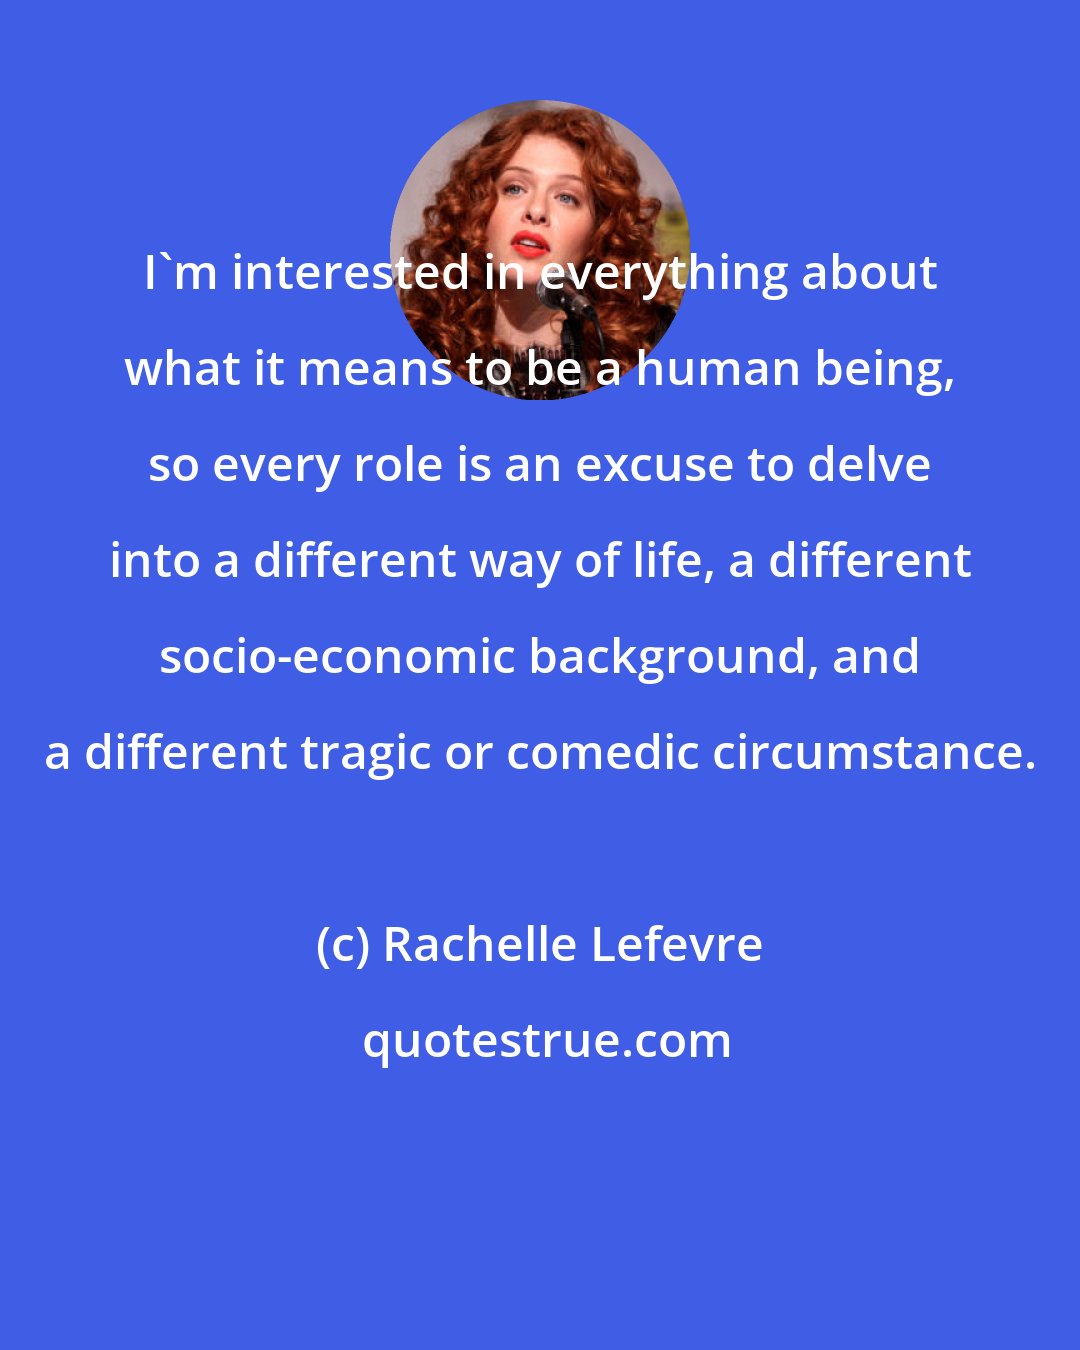 Rachelle Lefevre: I'm interested in everything about what it means to be a human being, so every role is an excuse to delve into a different way of life, a different socio-economic background, and a different tragic or comedic circumstance.